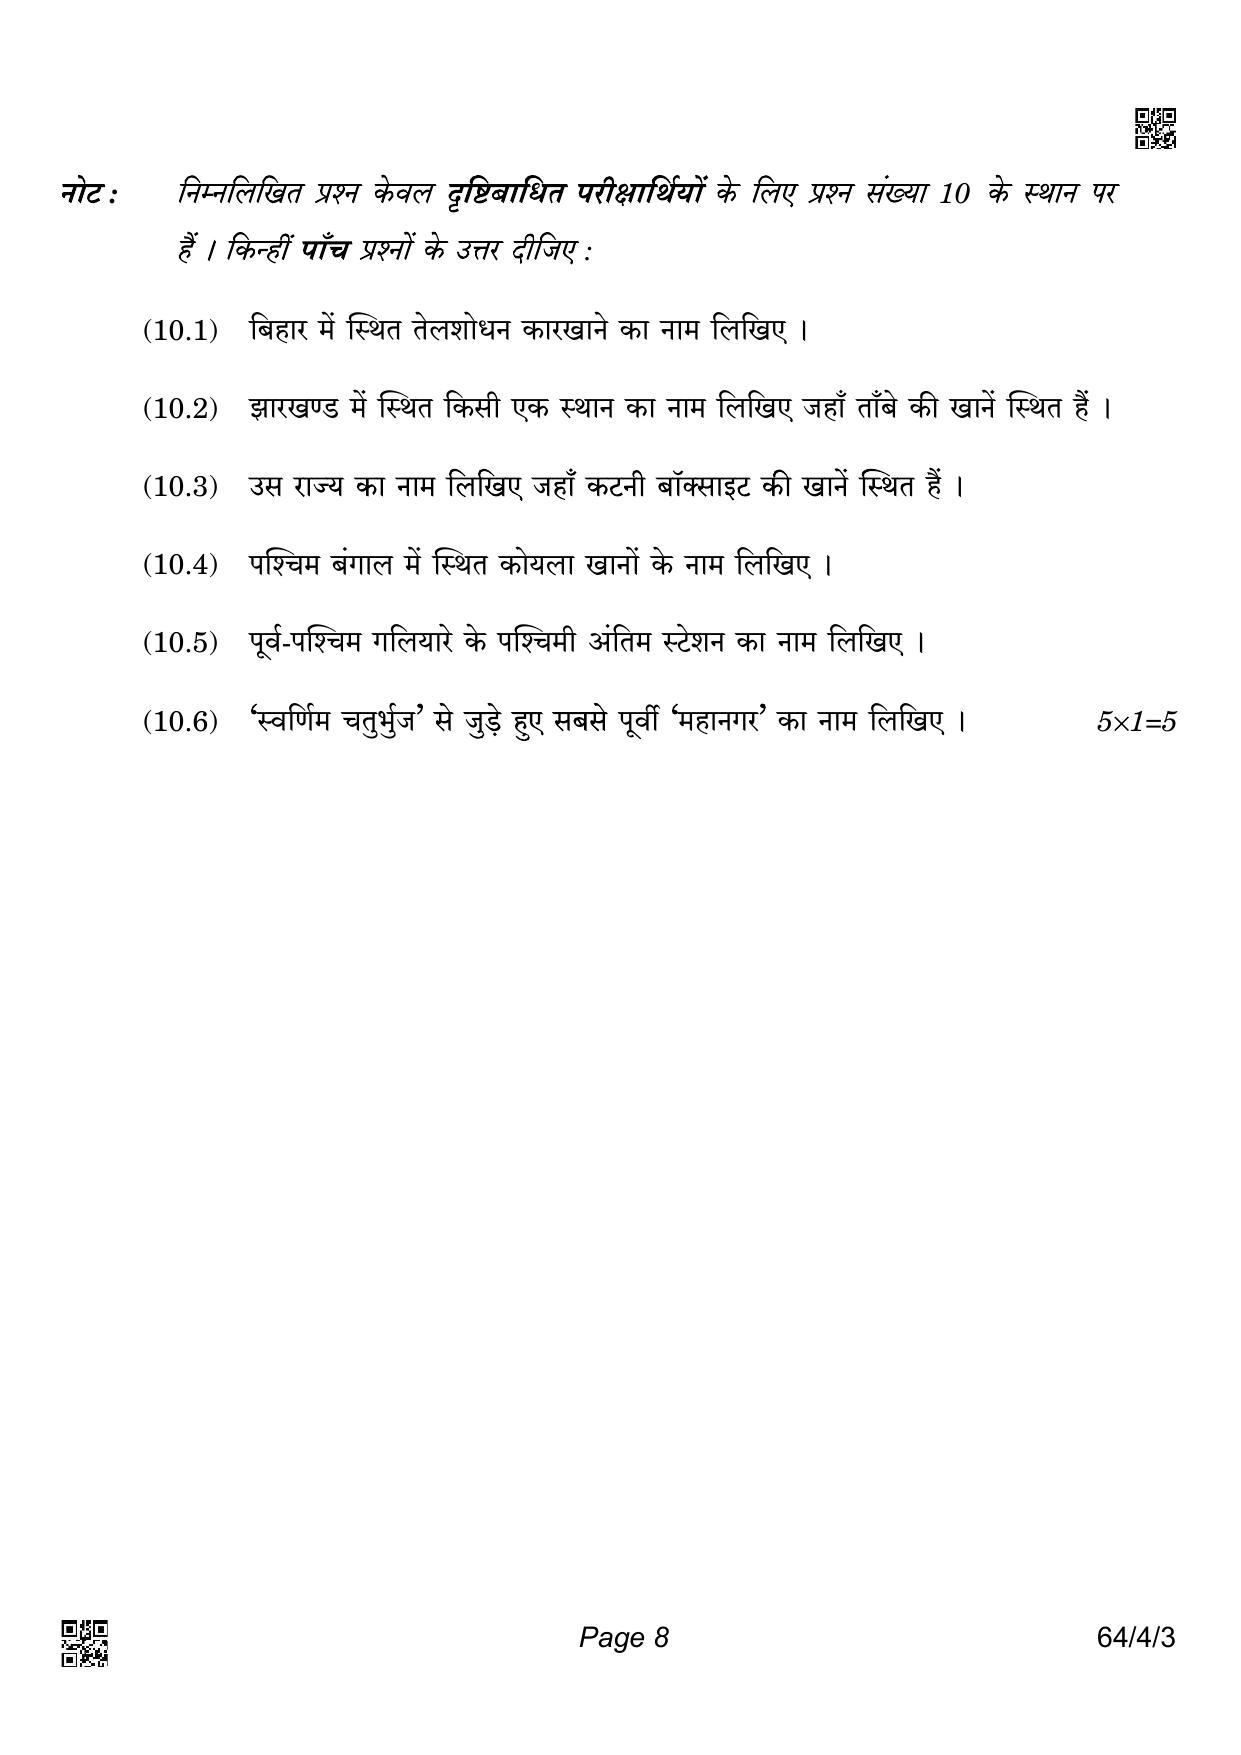 CBSE Class 12 64-4-3 Geography 2022 Question Paper - Page 8